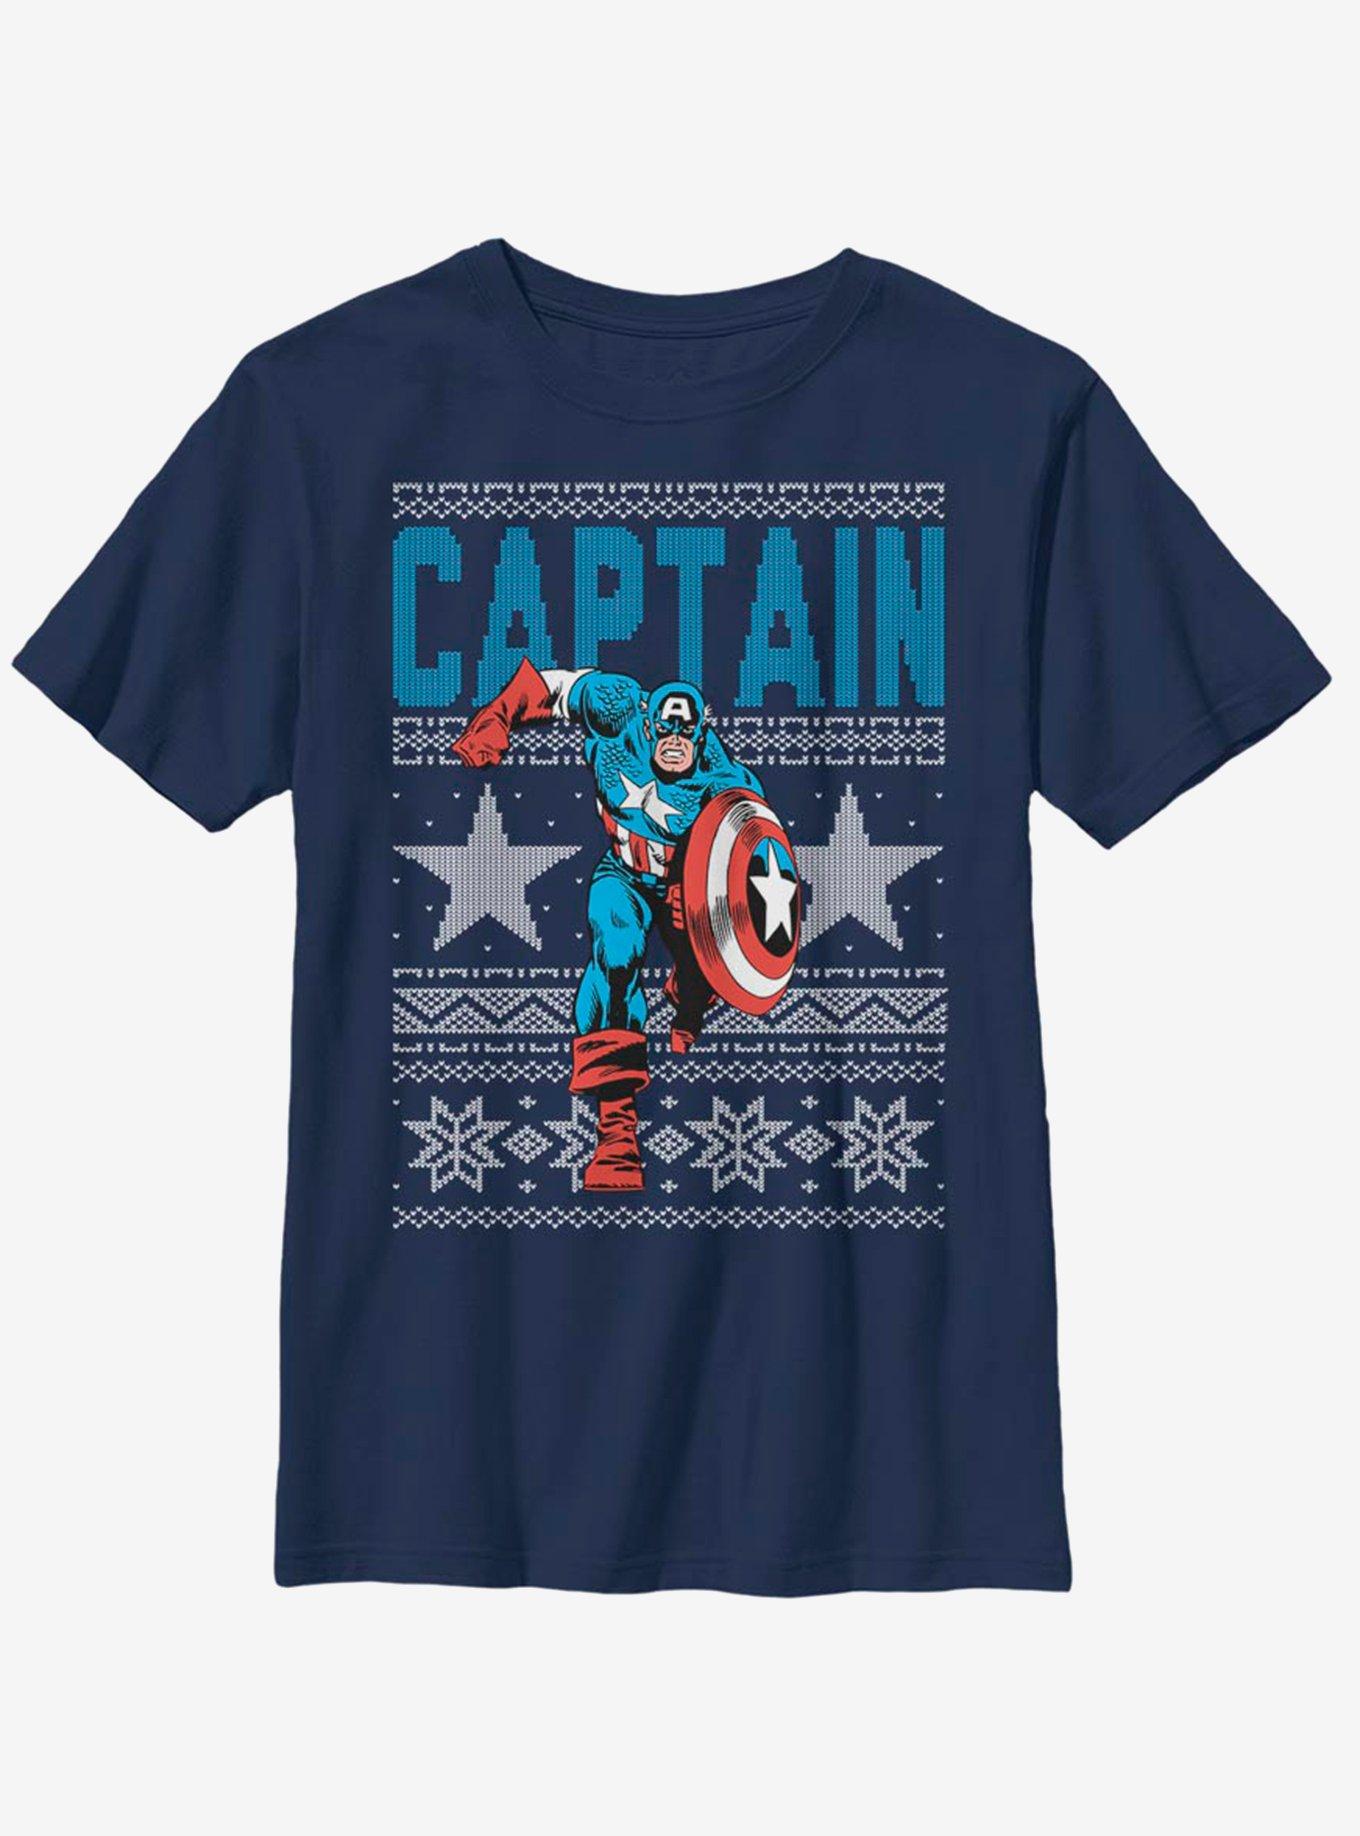 Marvel Captain America Action Christmas Pattern Youth T-Shirt, NAVY, hi-res